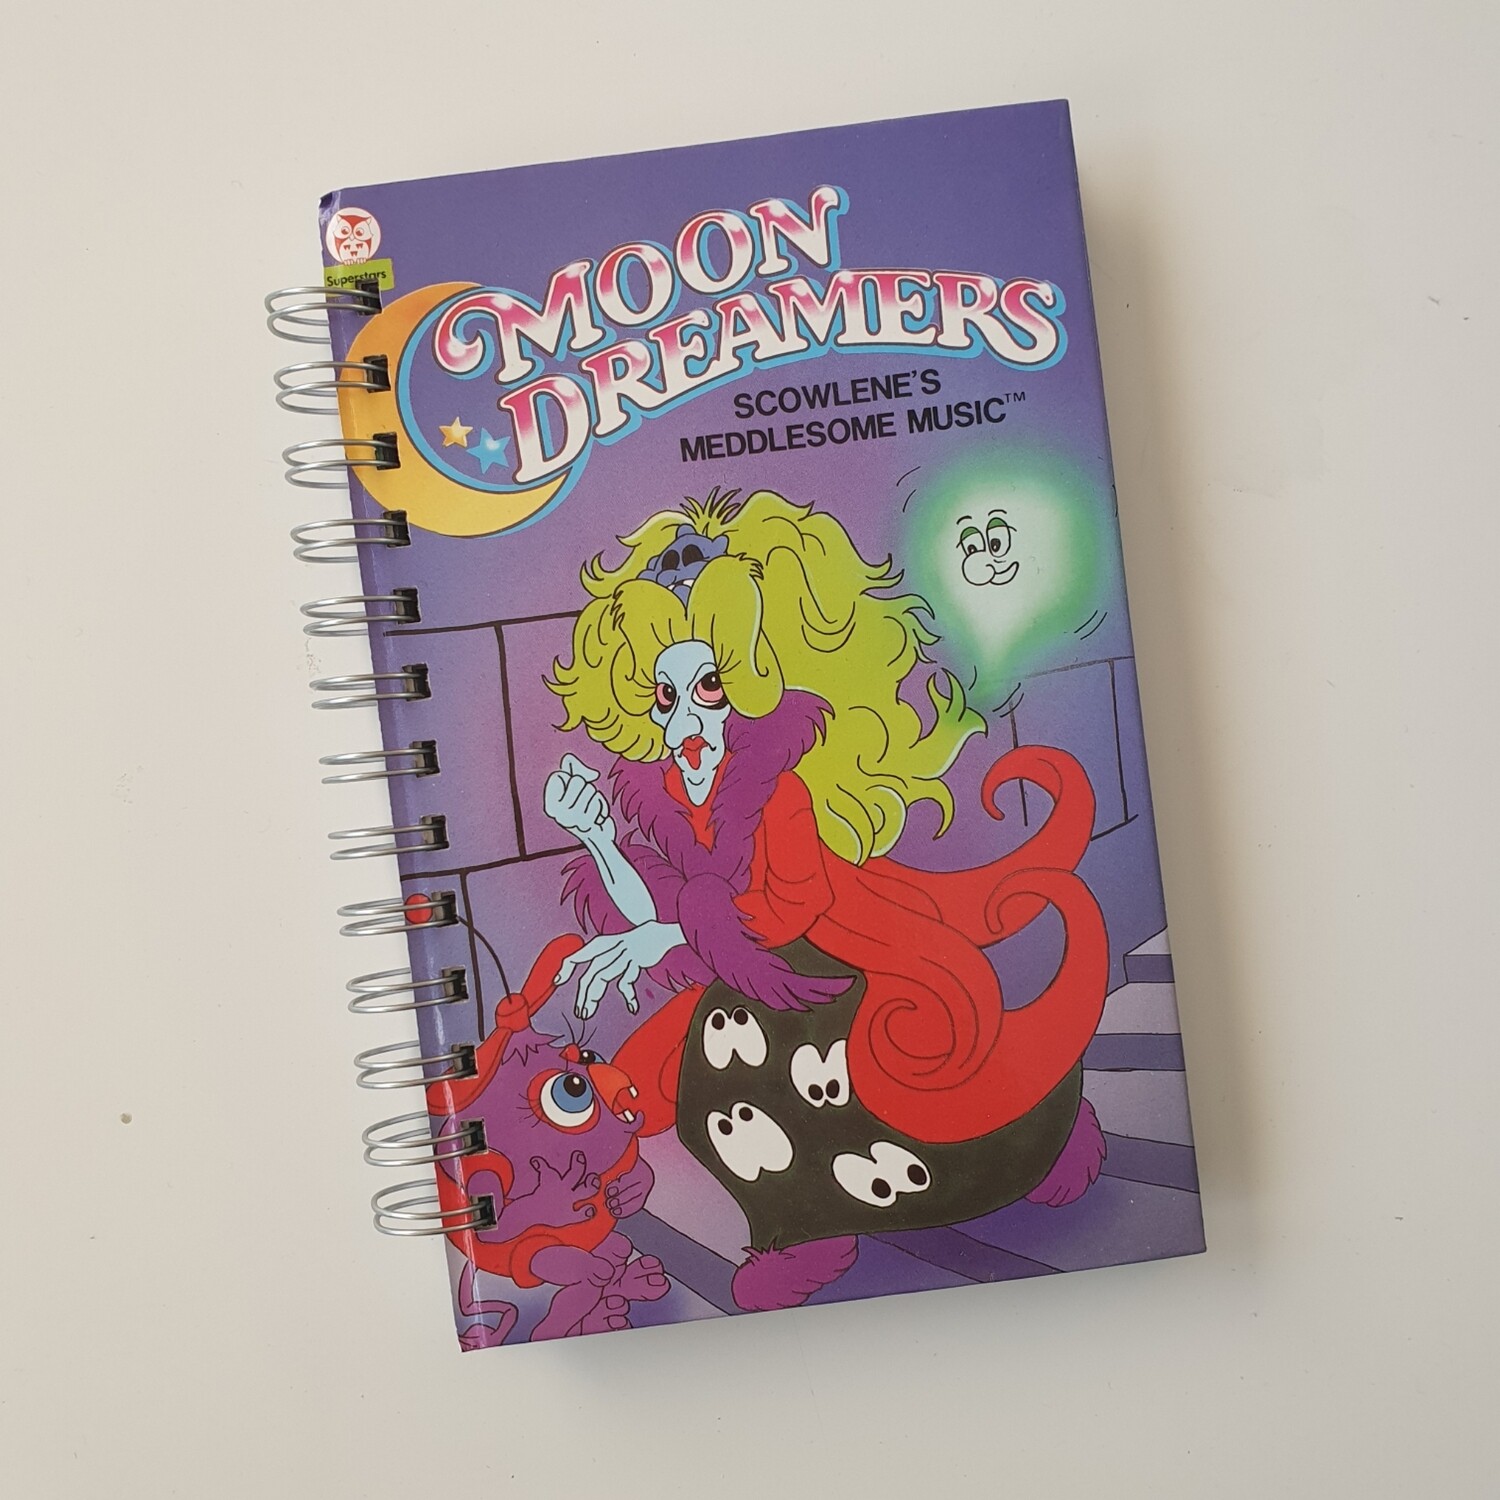 Moon Dreamers 1987, Scowlene's Meddlesome Music plain paper notebook READY TO SHIP